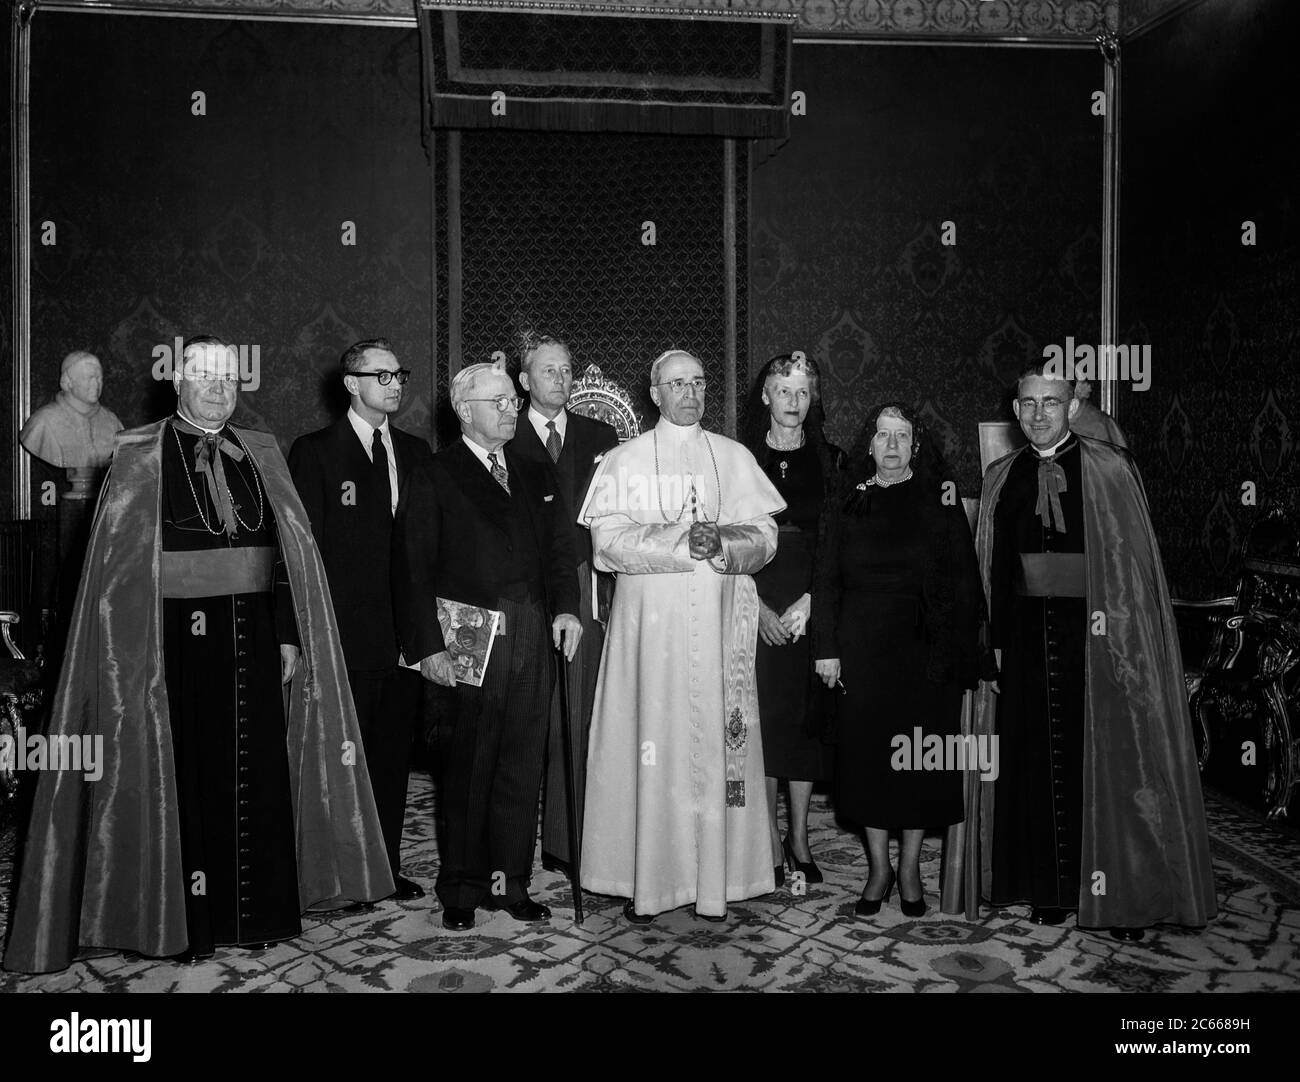 Vatican City - Visit to Pius XII By Truman ex President of Usa 20th May 1956 Stock Photo